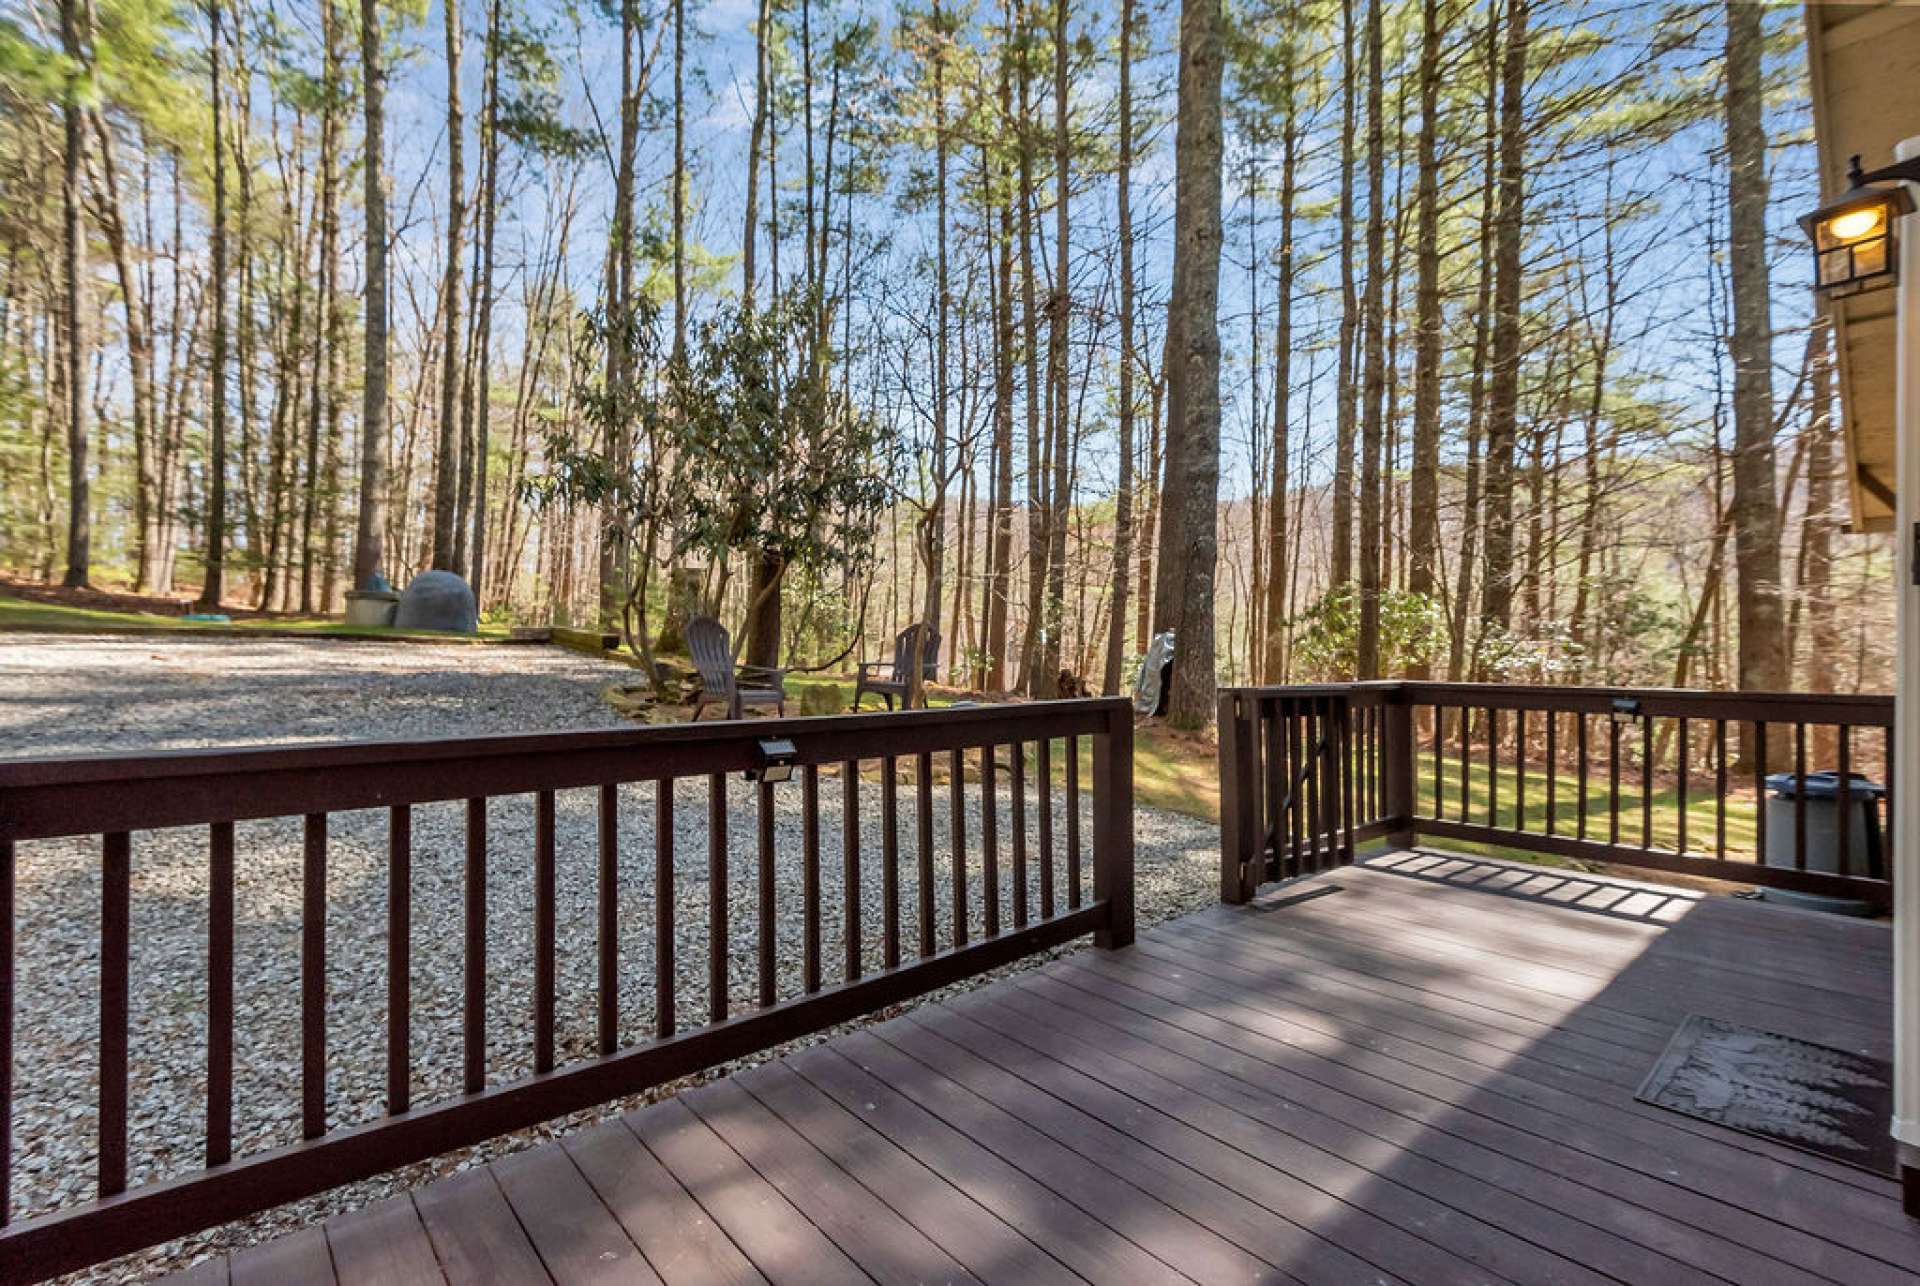 This deck offers easy access from the driveway to the entry of the home.